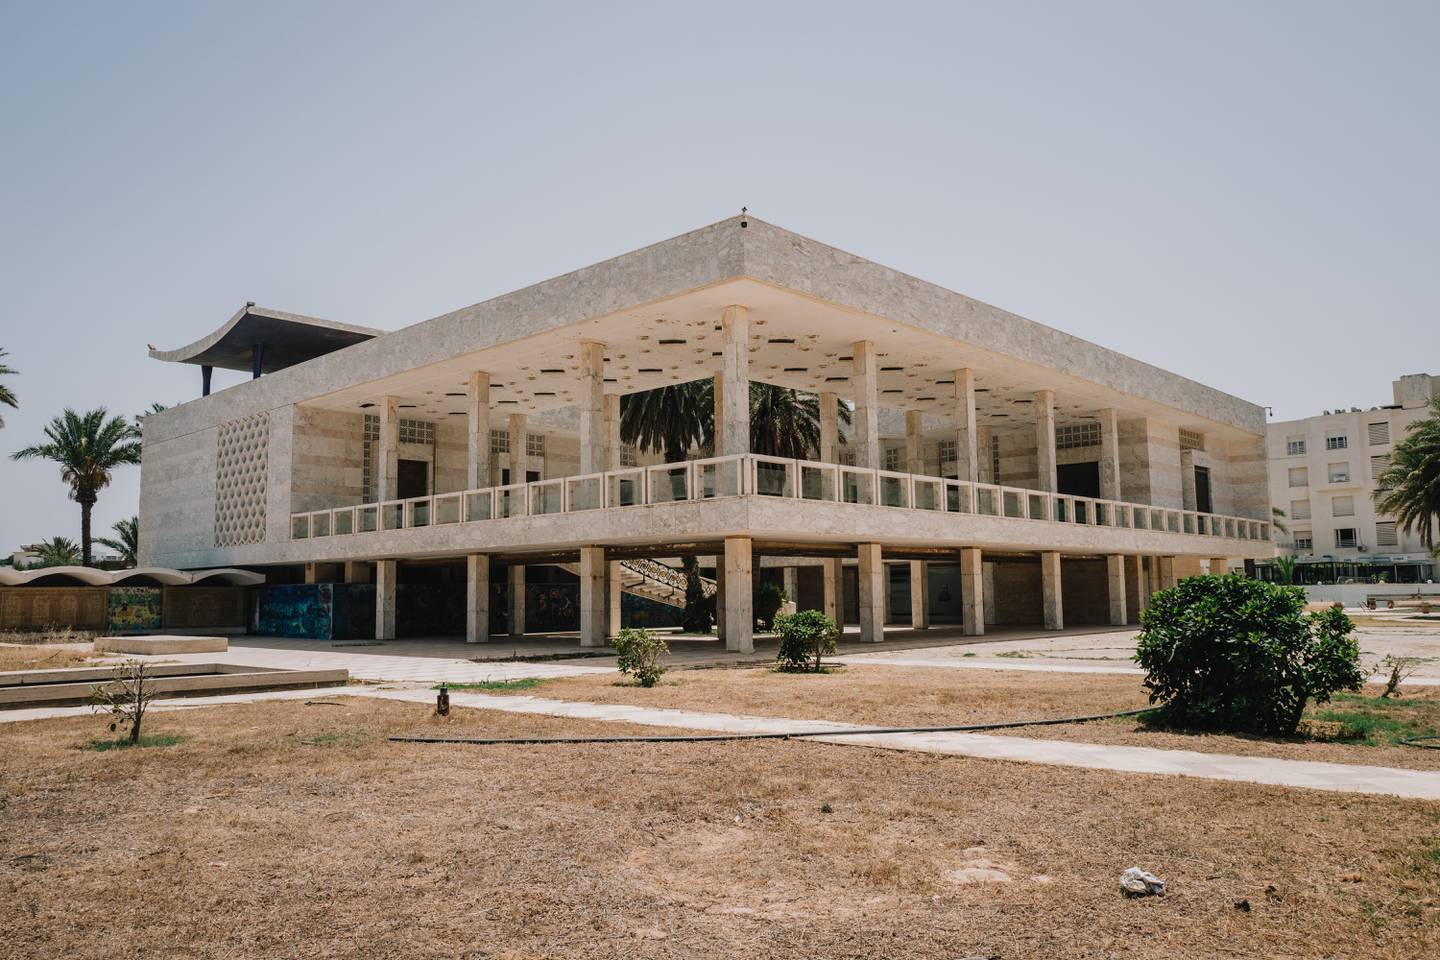 Habib Bourguiba commissioned French-Tunisian architect Olivier-Clement Cacoub to create the marble palace, which was innaugruated in 1962. Erin Clare Brown / The National